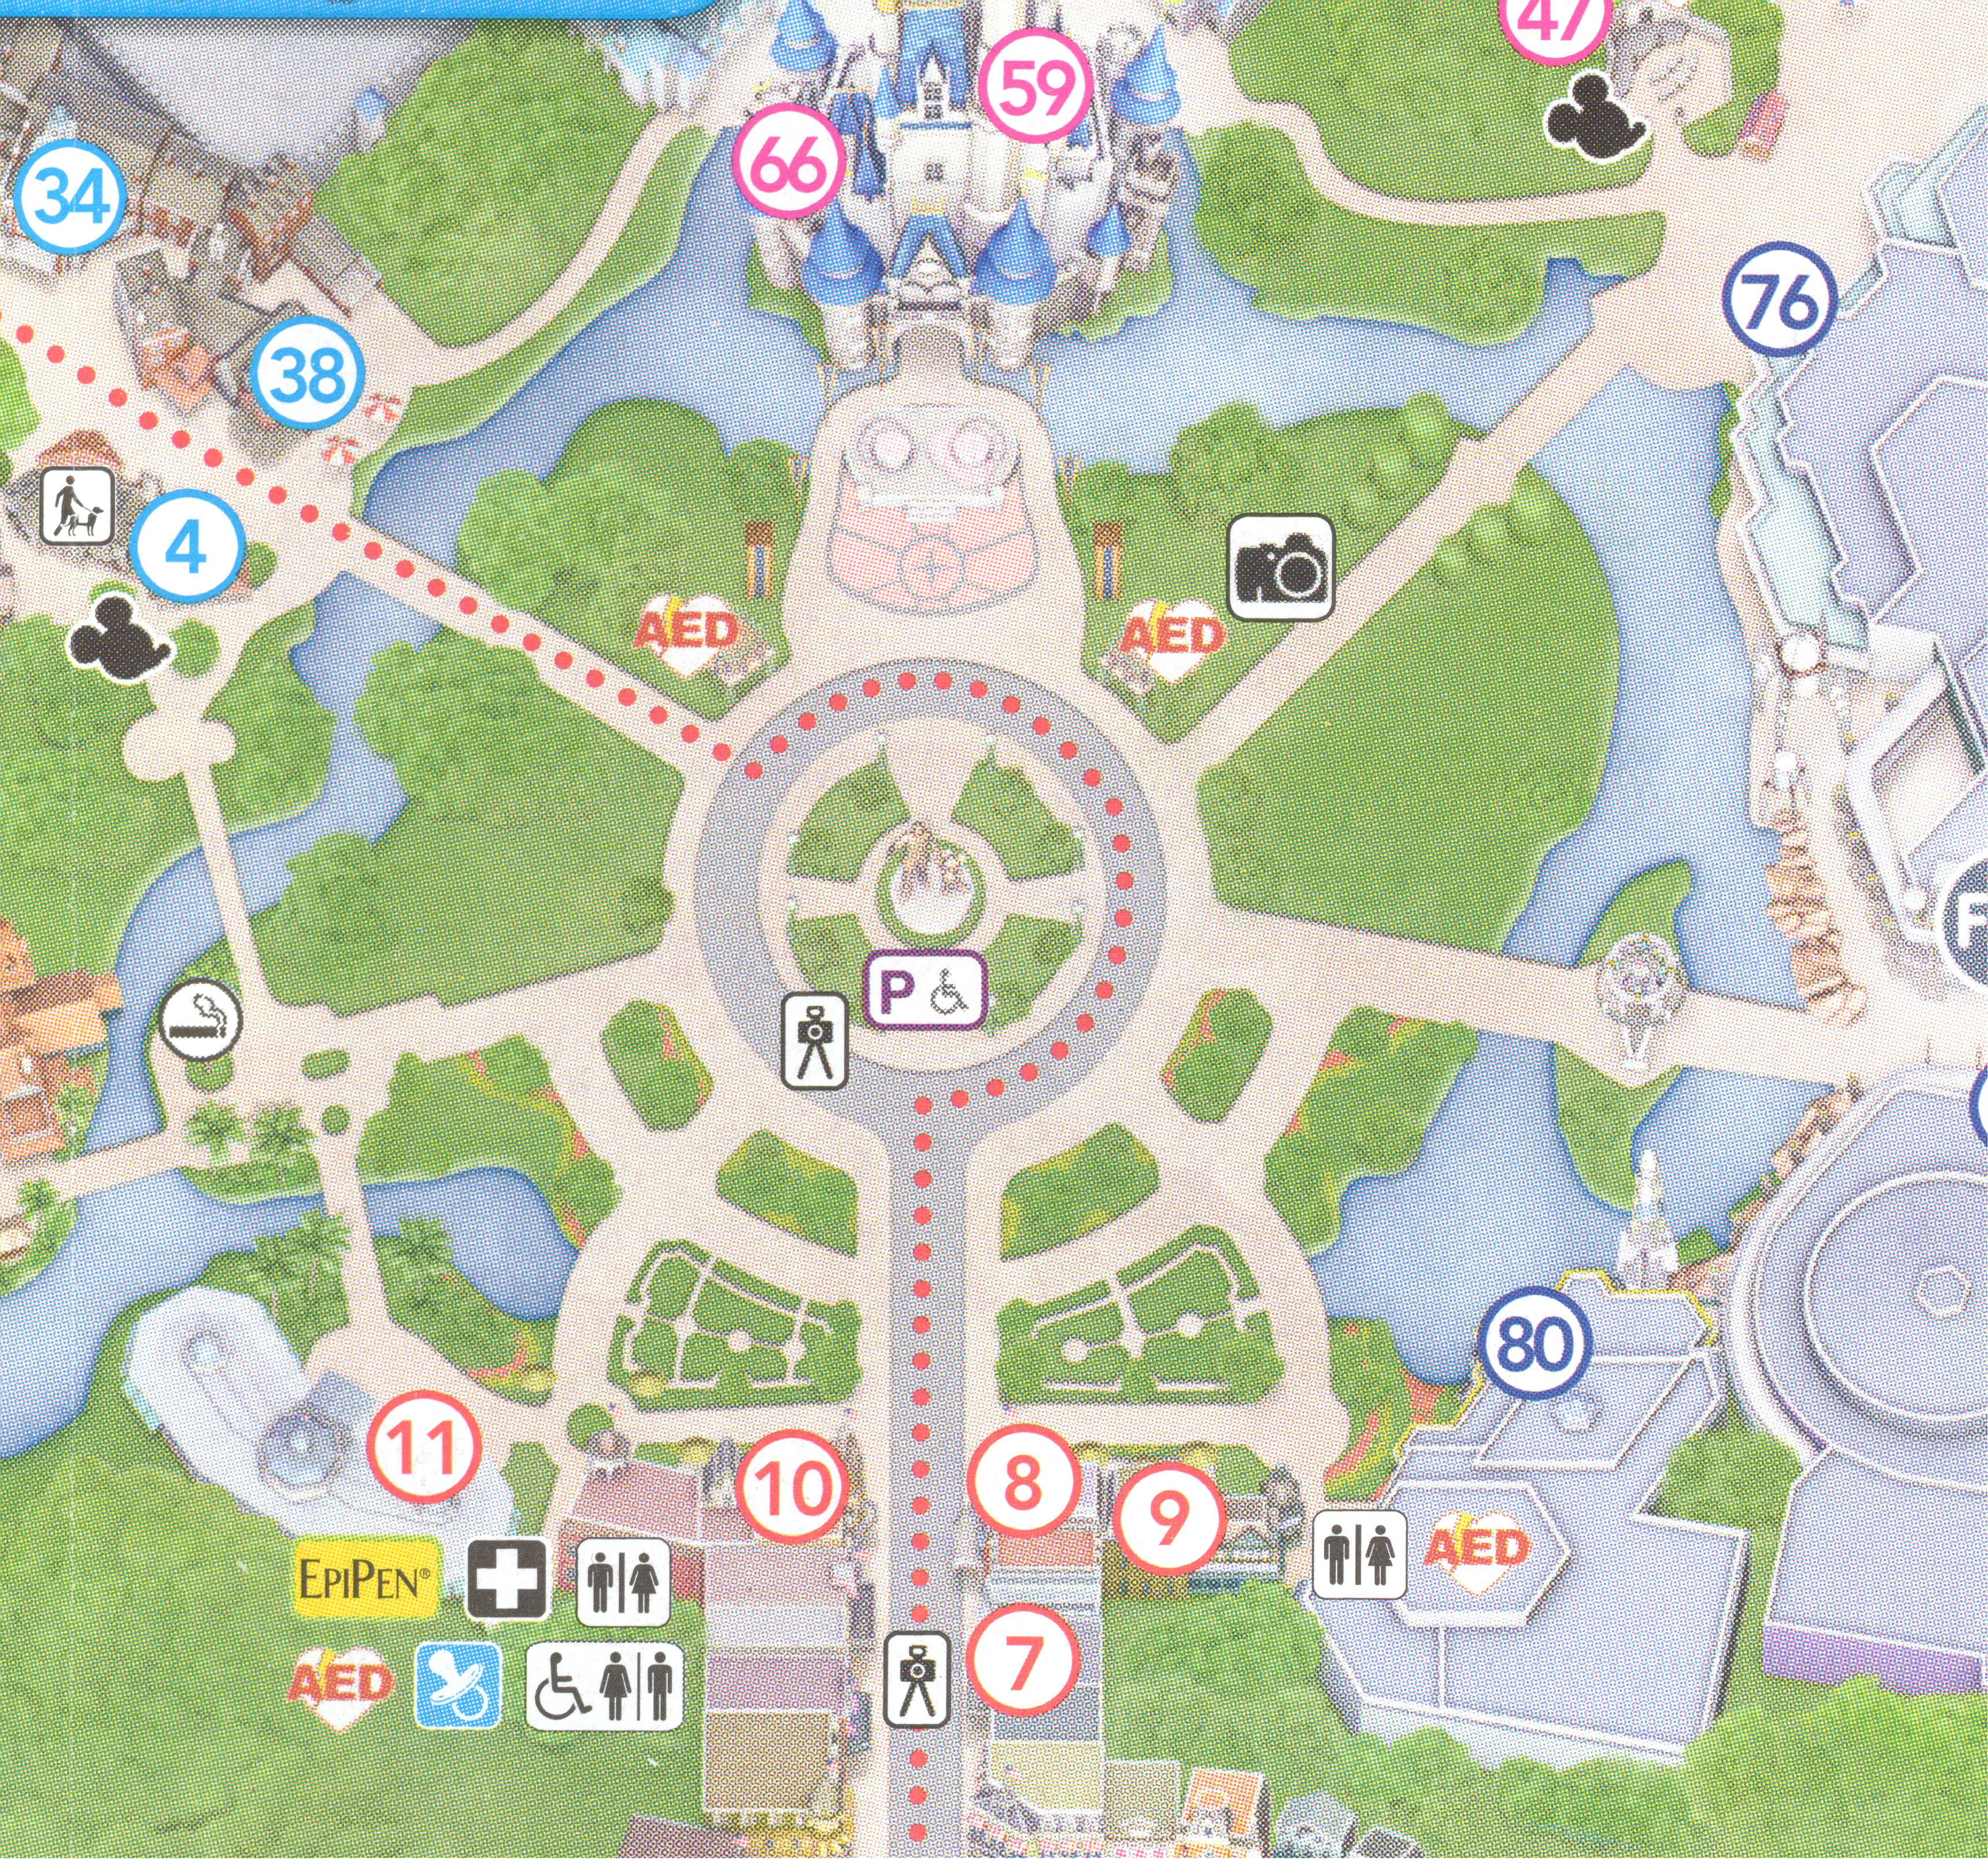 Magic Kingdom Park Map - April 2015 - Construction from Partner Statue South (Down) is complete